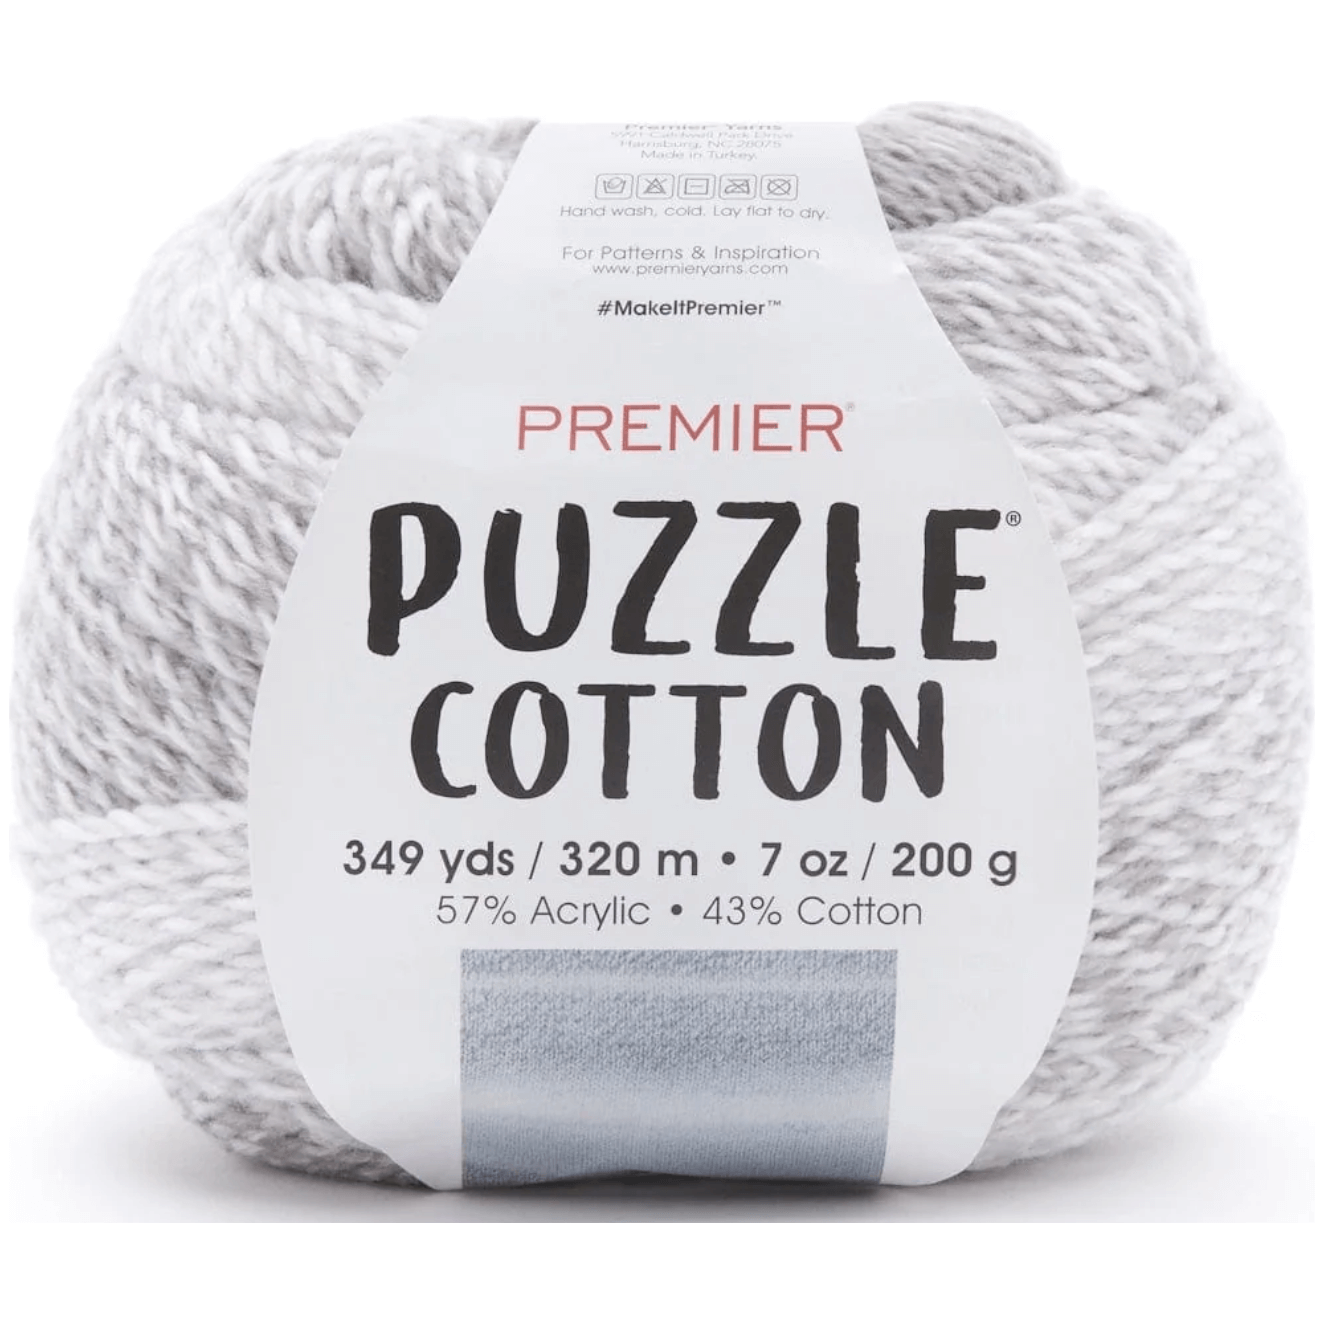 Premier Puzzle Cotton Yarn Sold As A 3 Pack